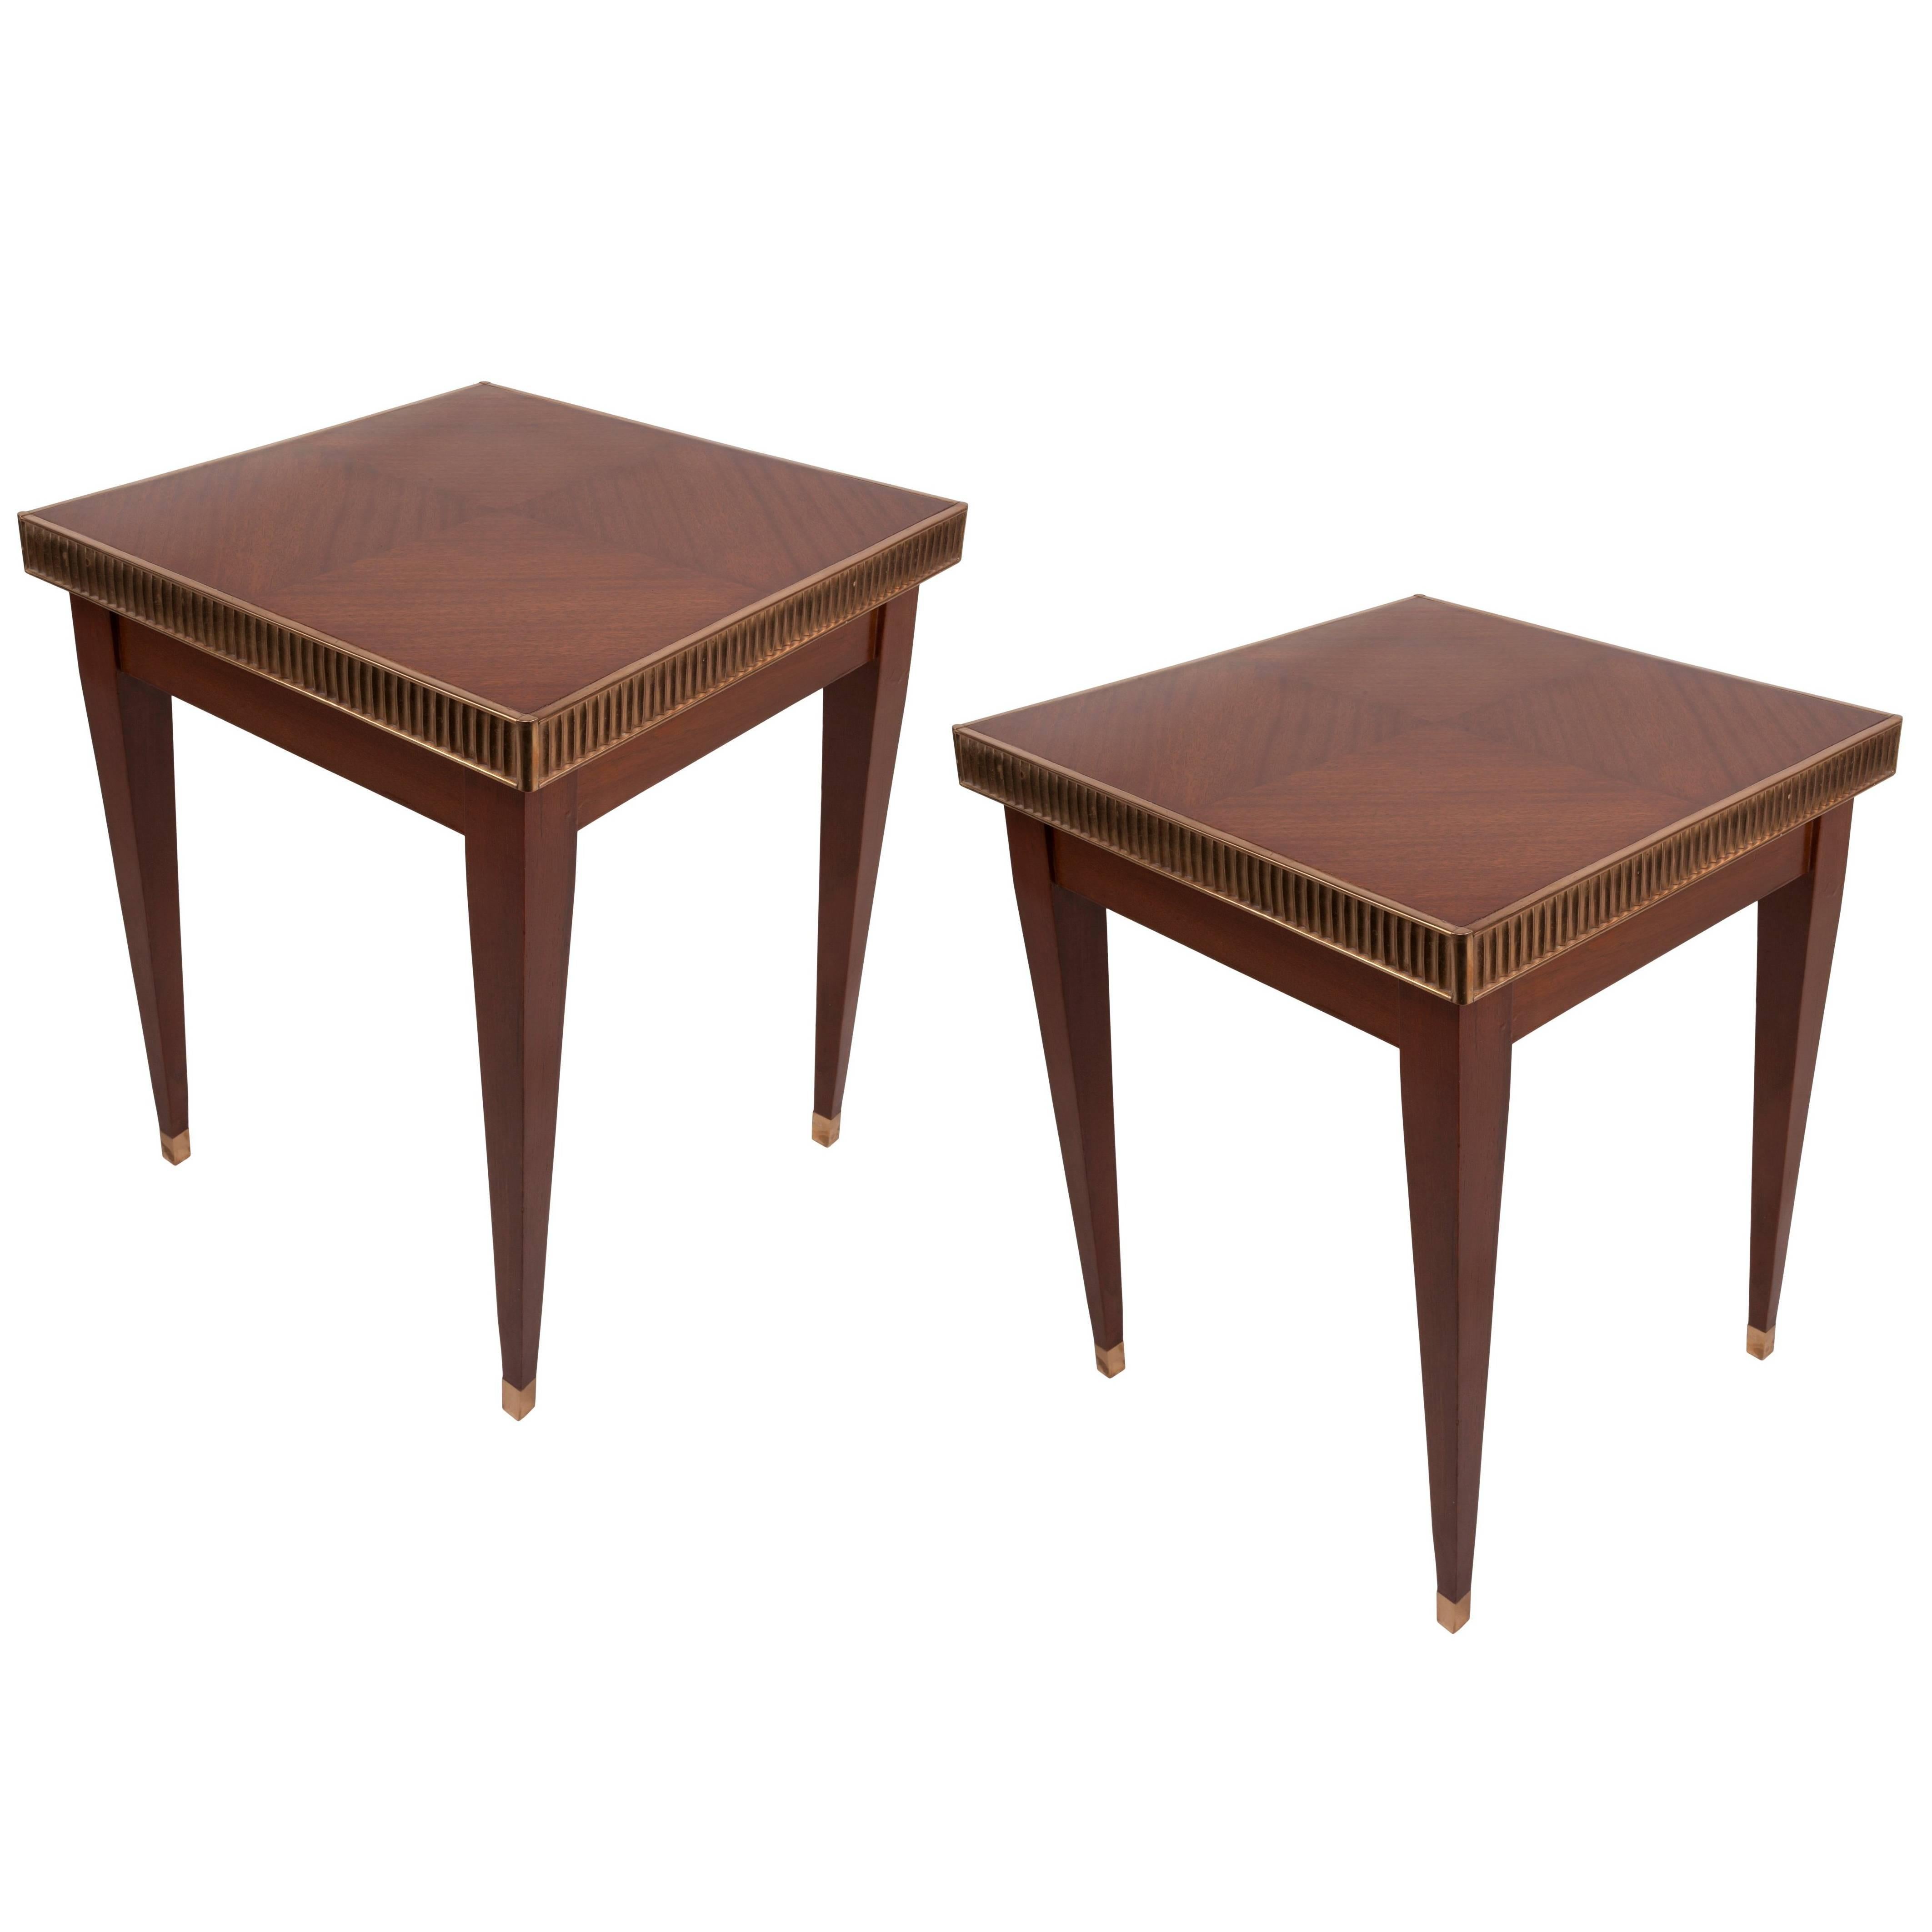 Pair of Rare French Art Deco Mahogany and Brass Side Tables